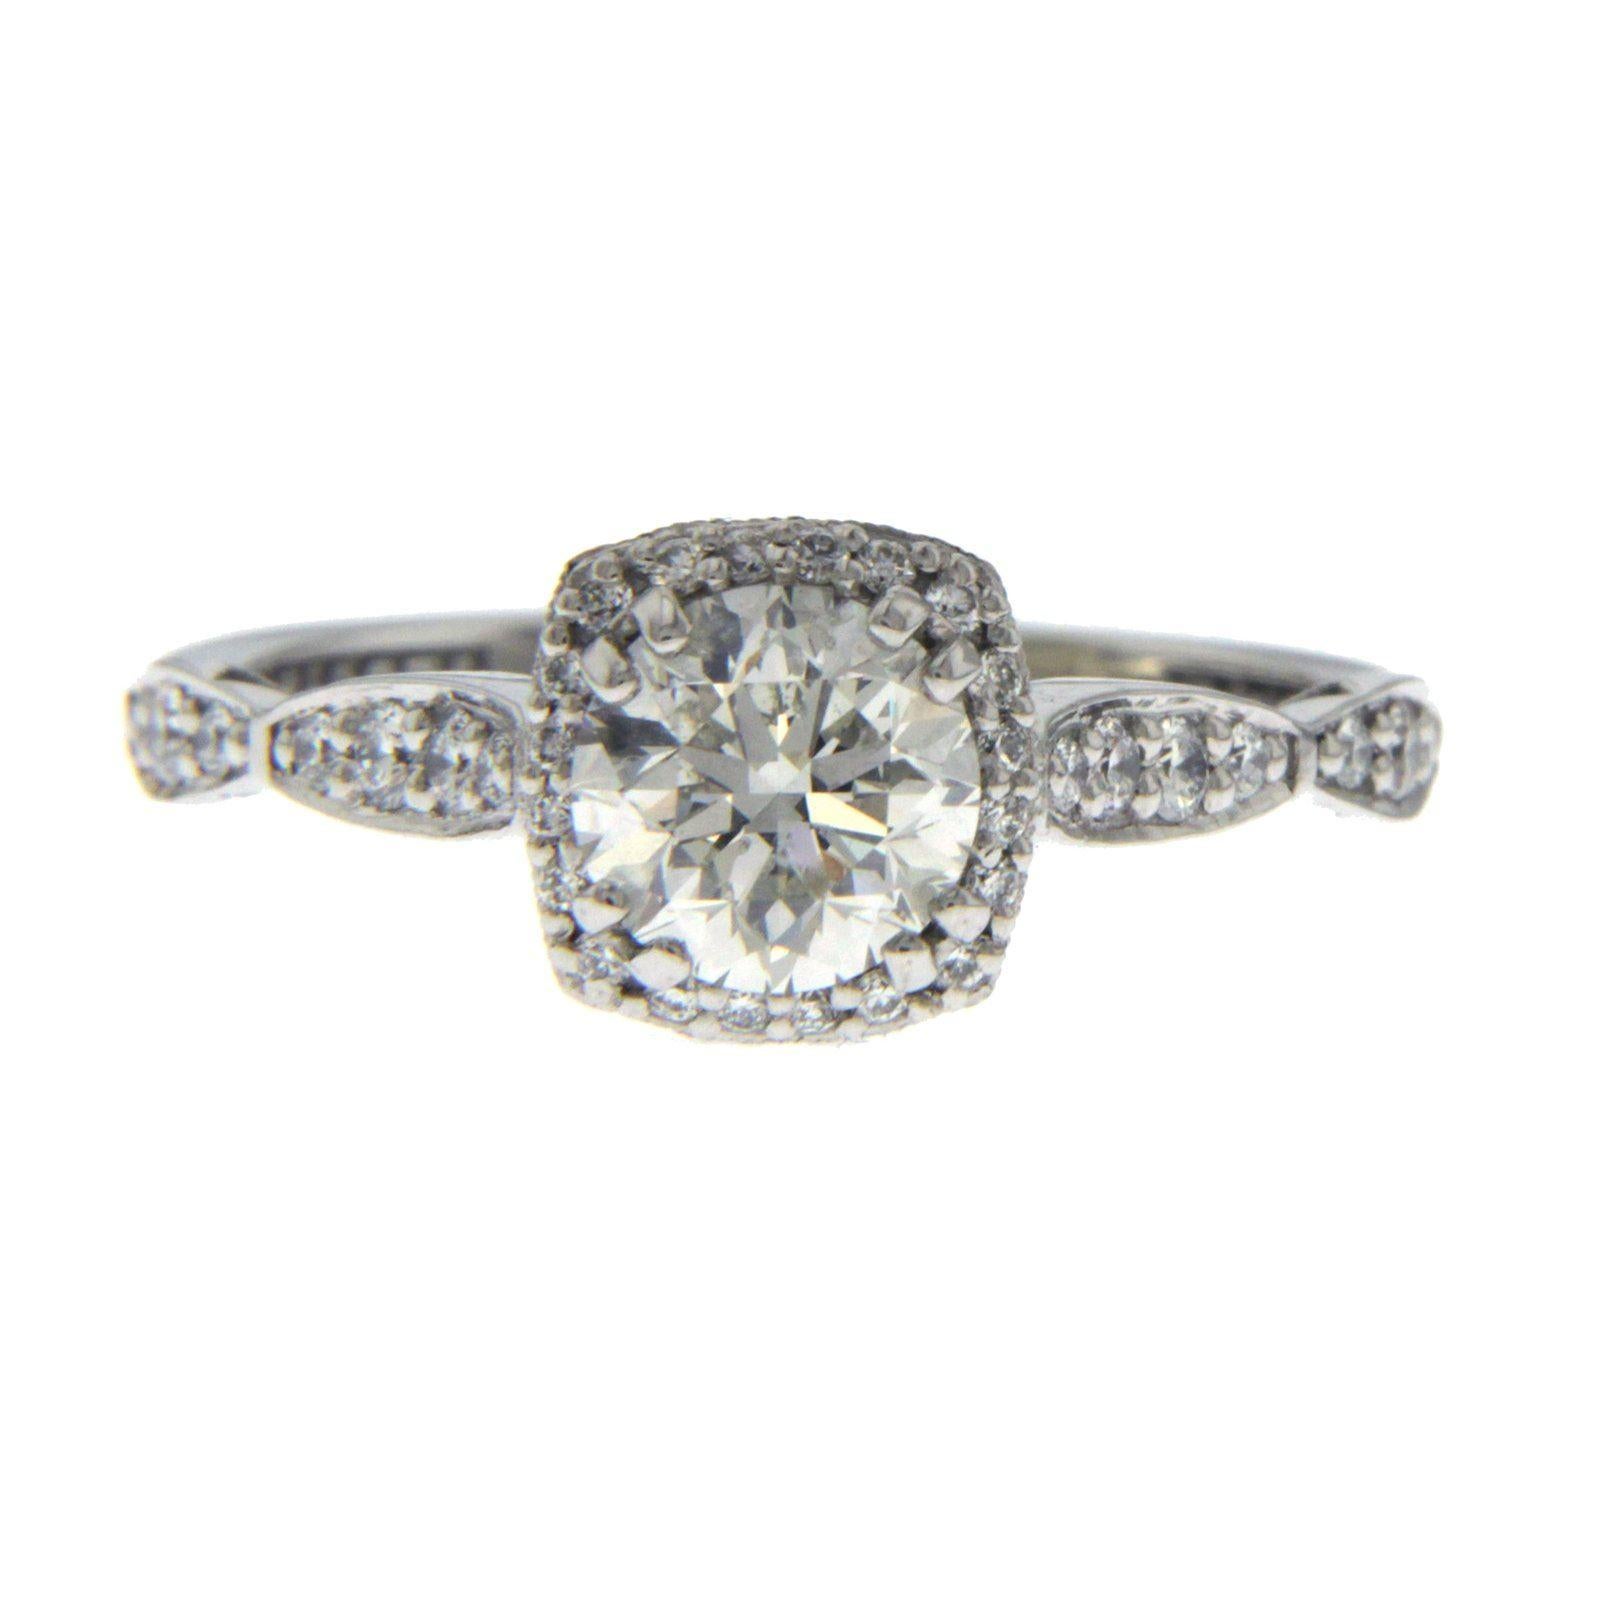 This is a Tacori 18K White Gold with 1.01 CT Center Diamond sold by Robbins Brothers. Comes with Robbins Brothers Invoice and Tacori Certificate and box.

Top: 8 mm
Band Width: 2 mm
Metal: 18K White Gold 
Size: 6.5
Hallmarks: TACORI 750
Total